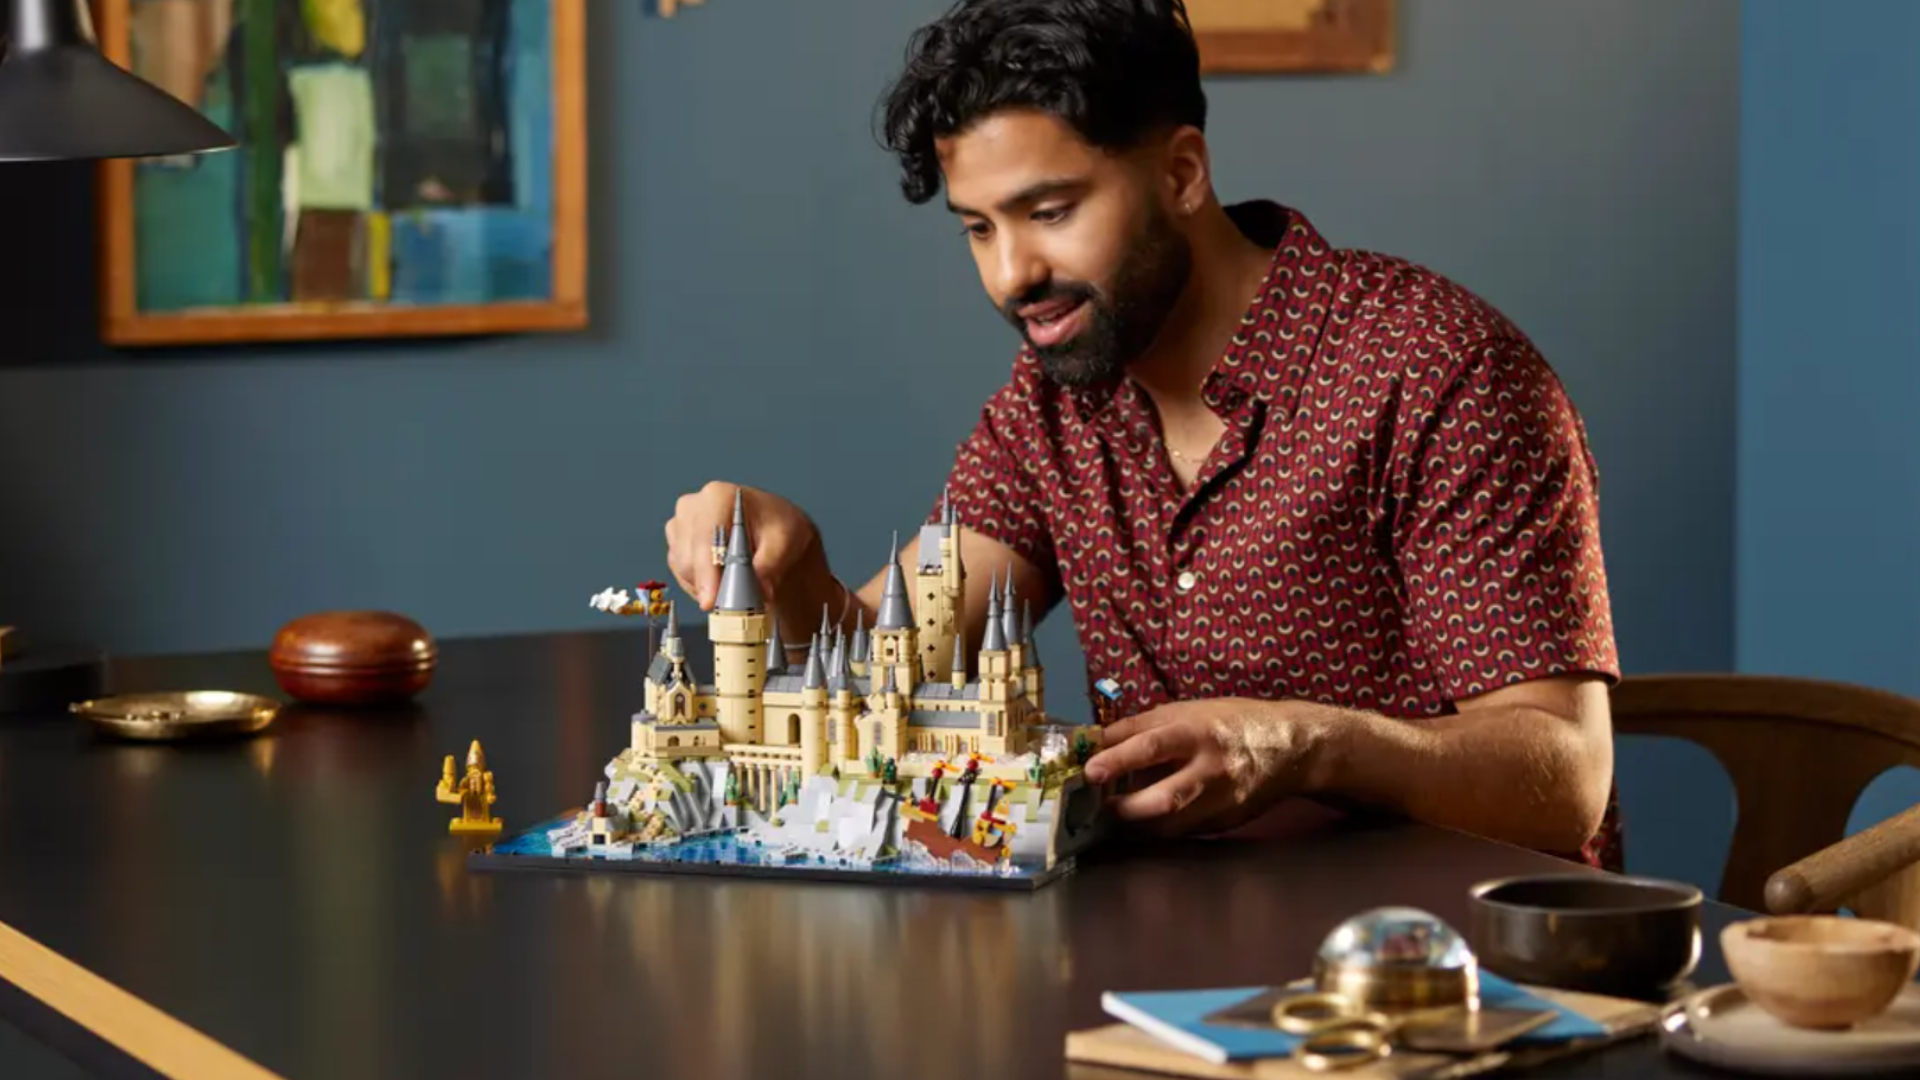 LEGO's New Harry Potter Hogwarts Castle Is A Laborious But